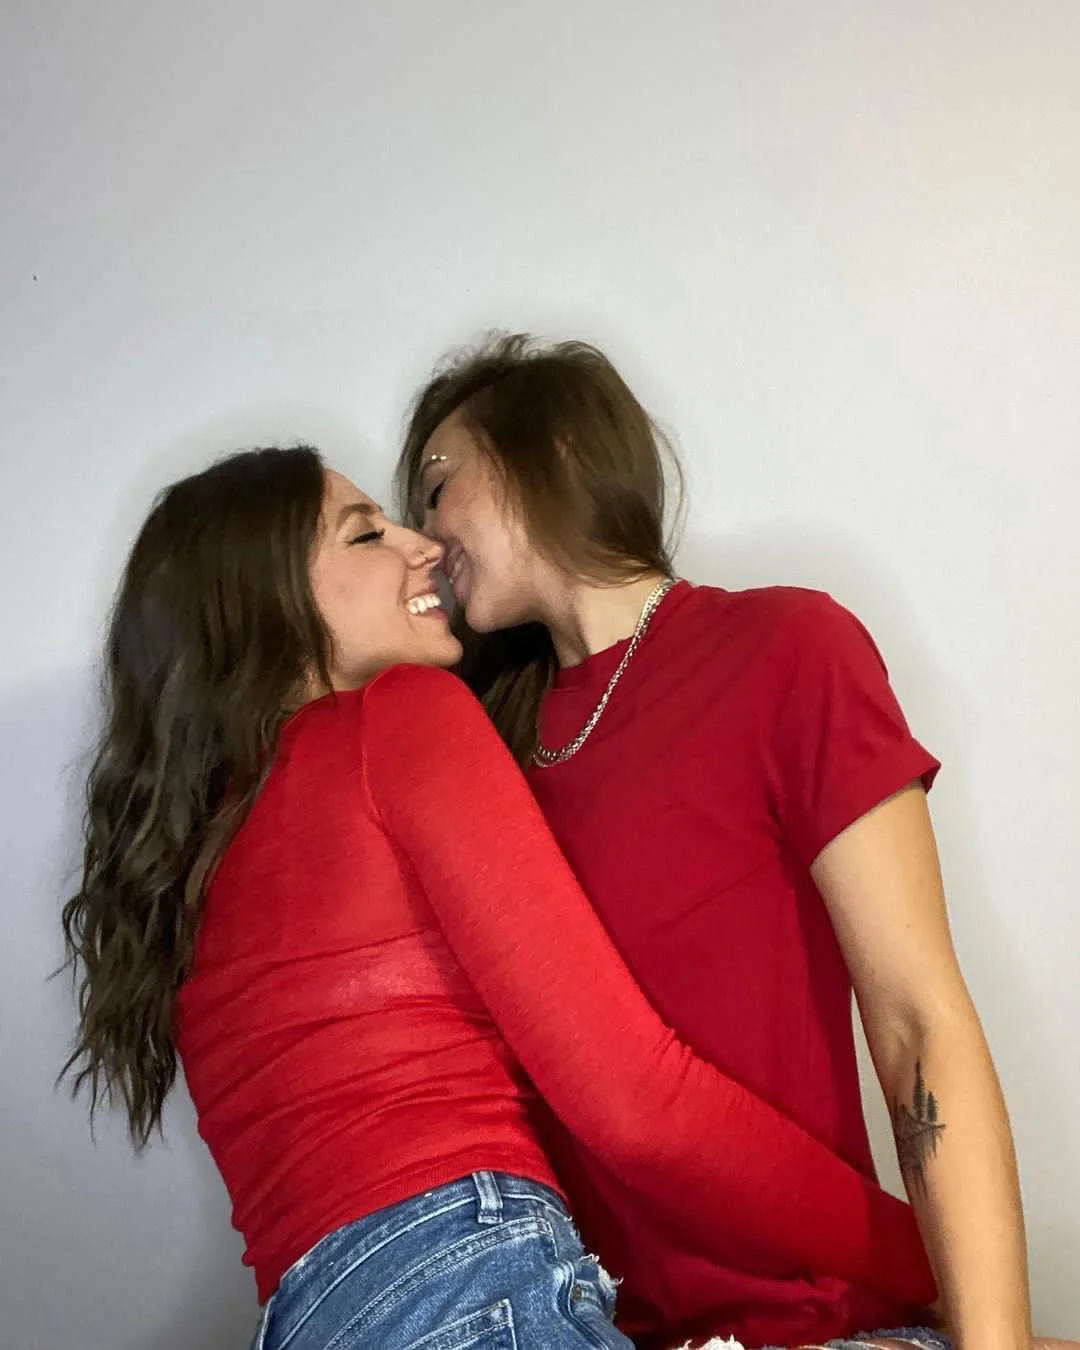 Potential Half-Sisters Won’t Pause Their Relationship